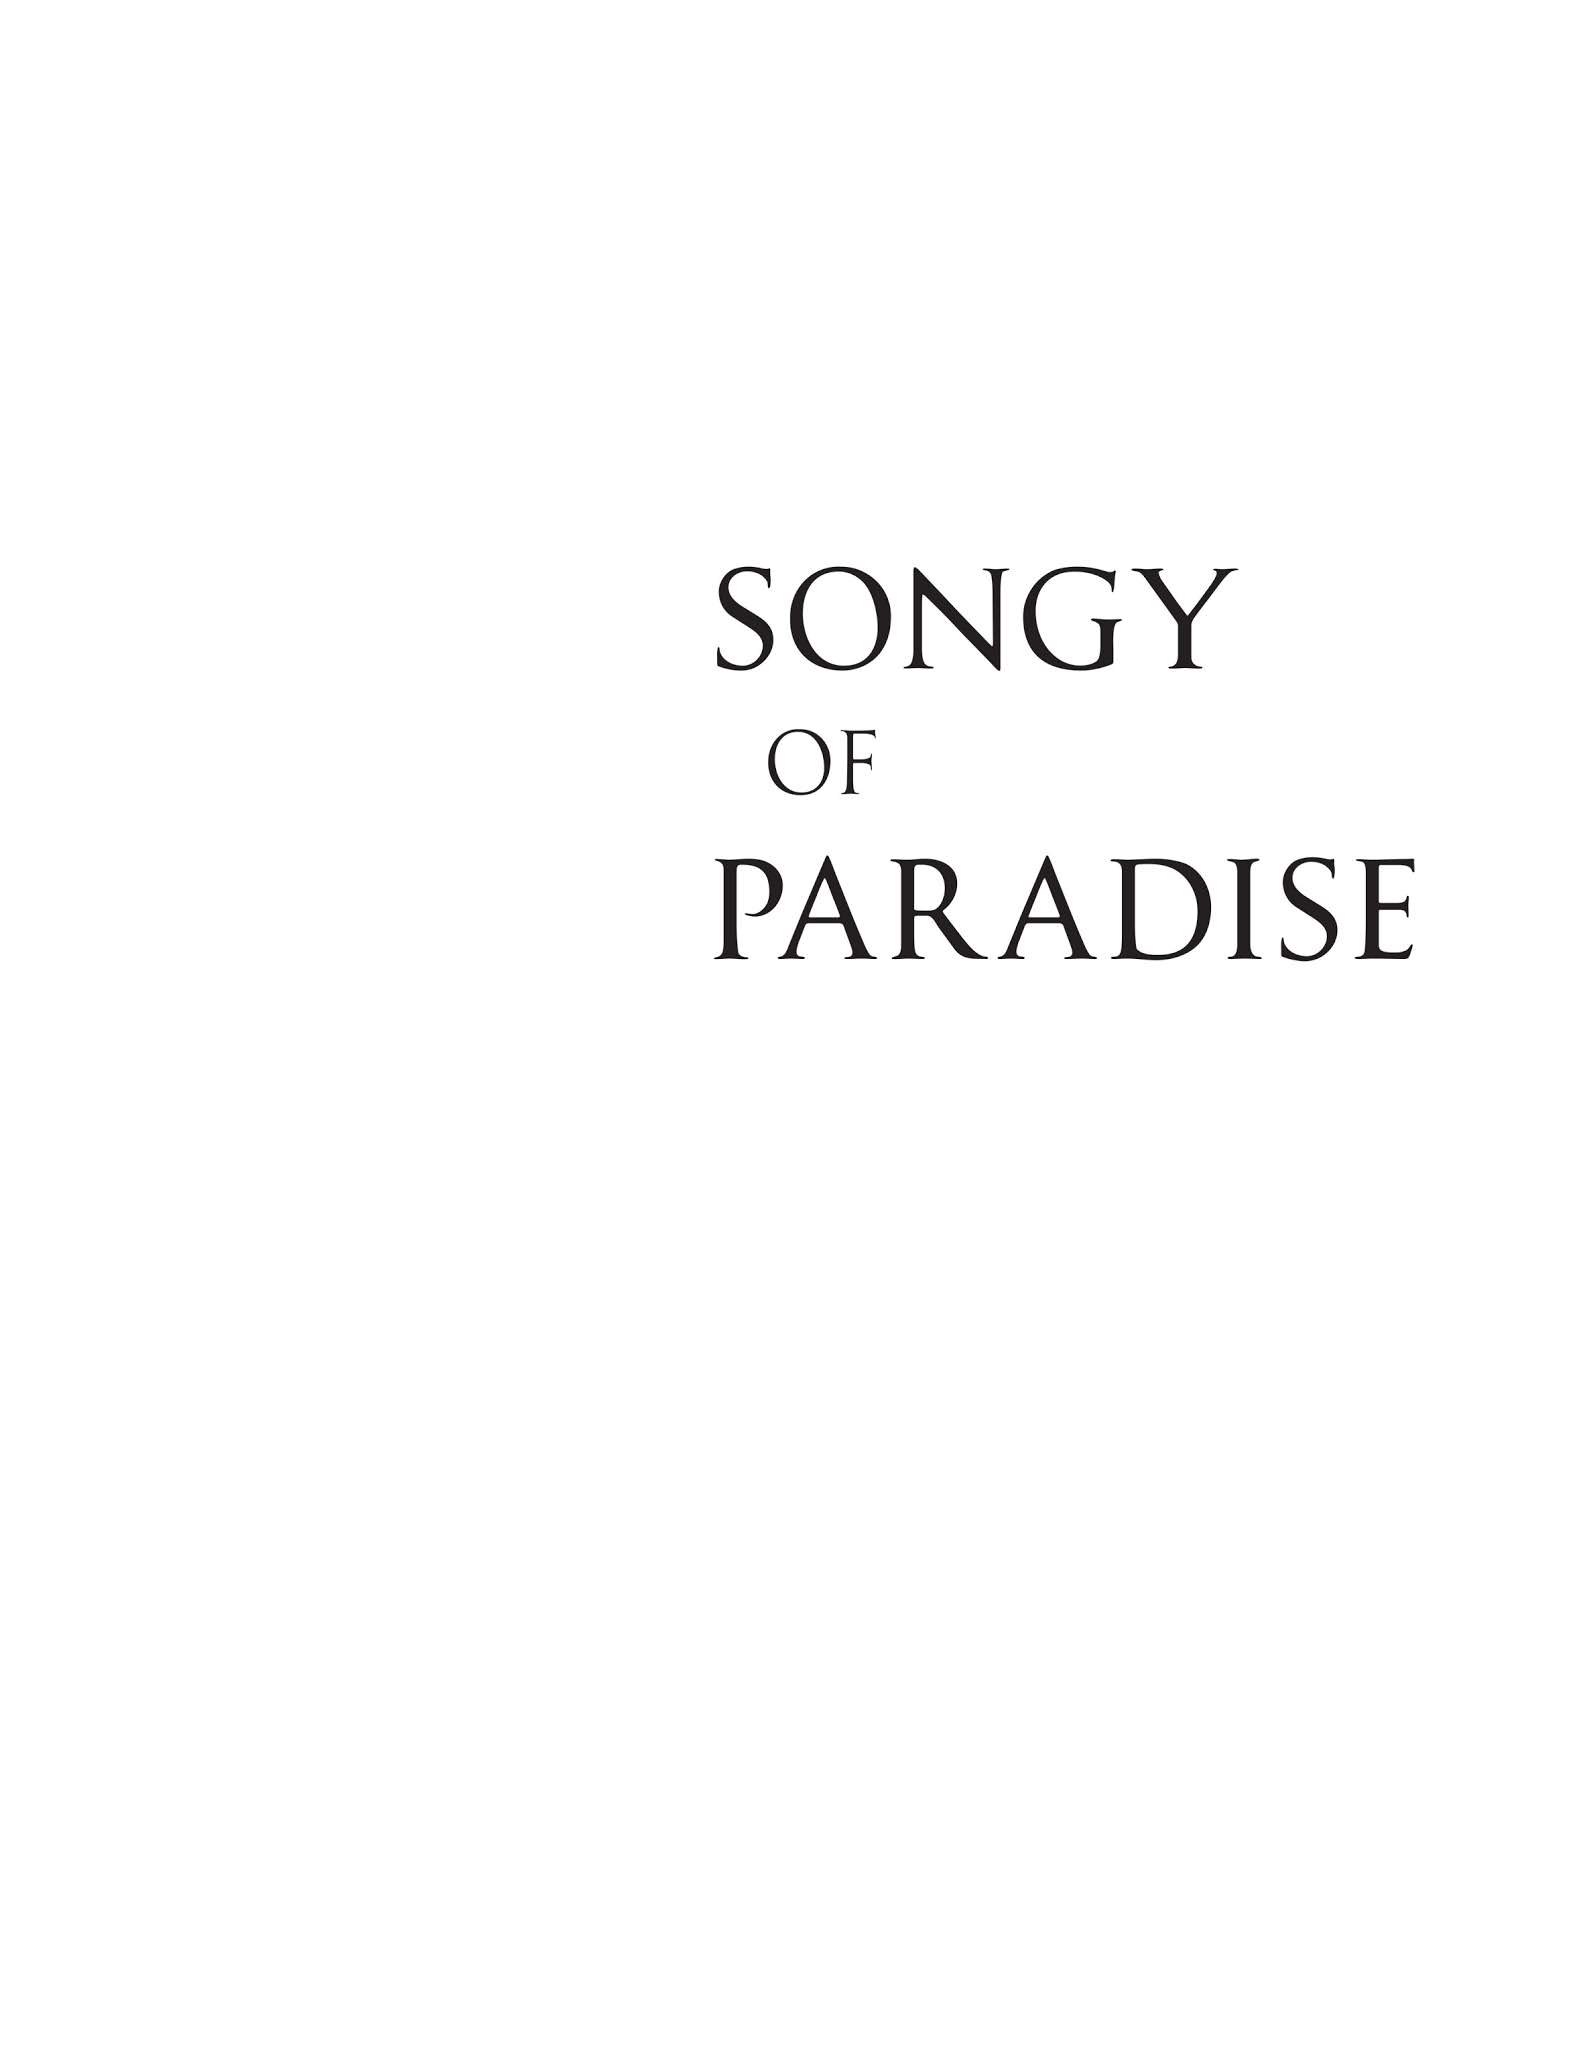 Read online Songy of Paradise comic -  Issue # Full - 2